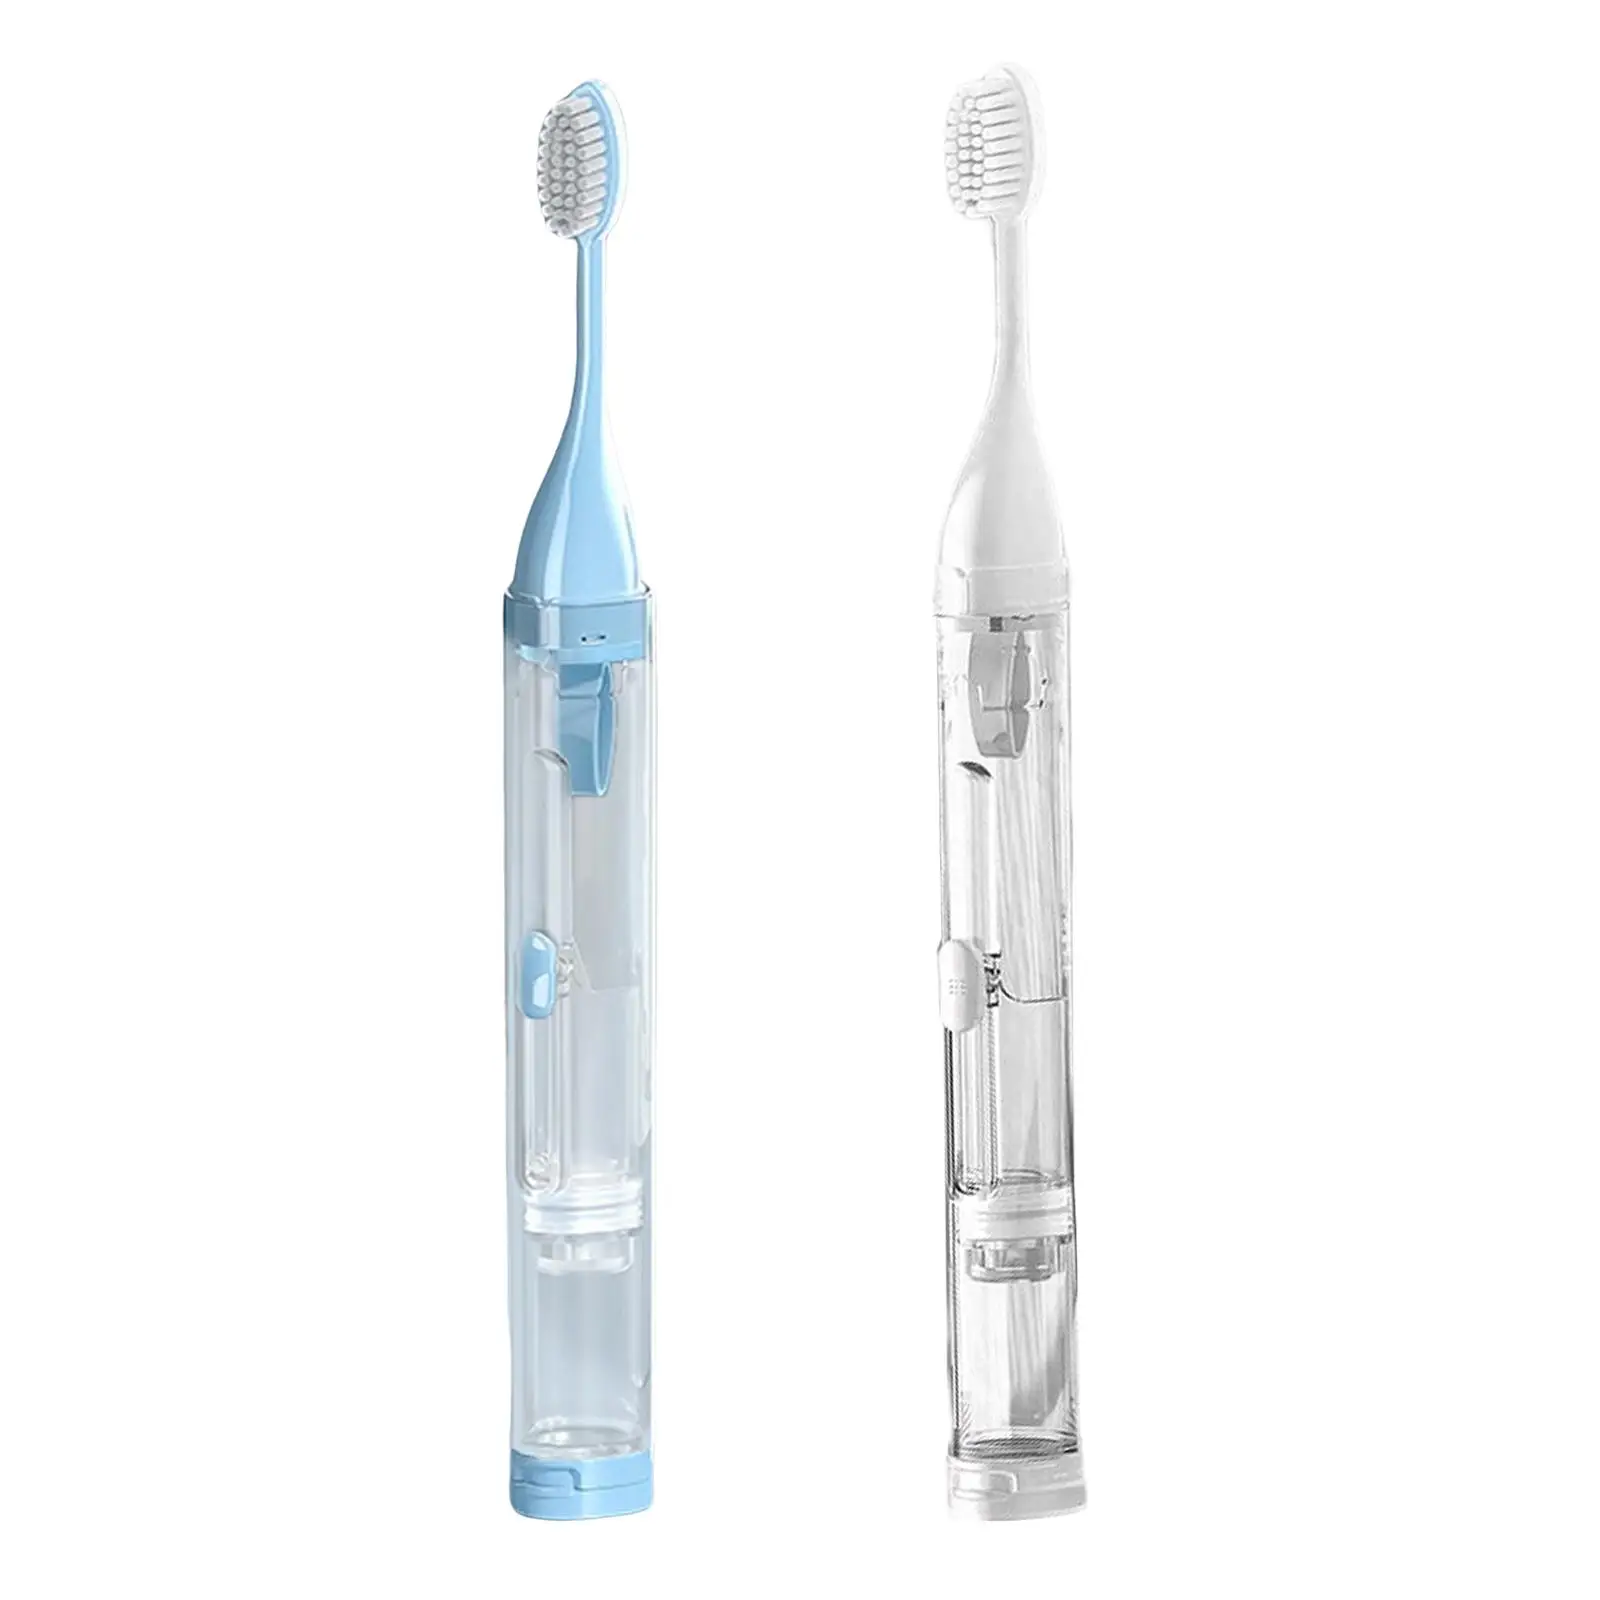 Portable Travel Toothbrush Set Tooth Cleaning Tools with Toothpaste Tube Folding Toothbrush for Hiking Brush Box Holder Travel